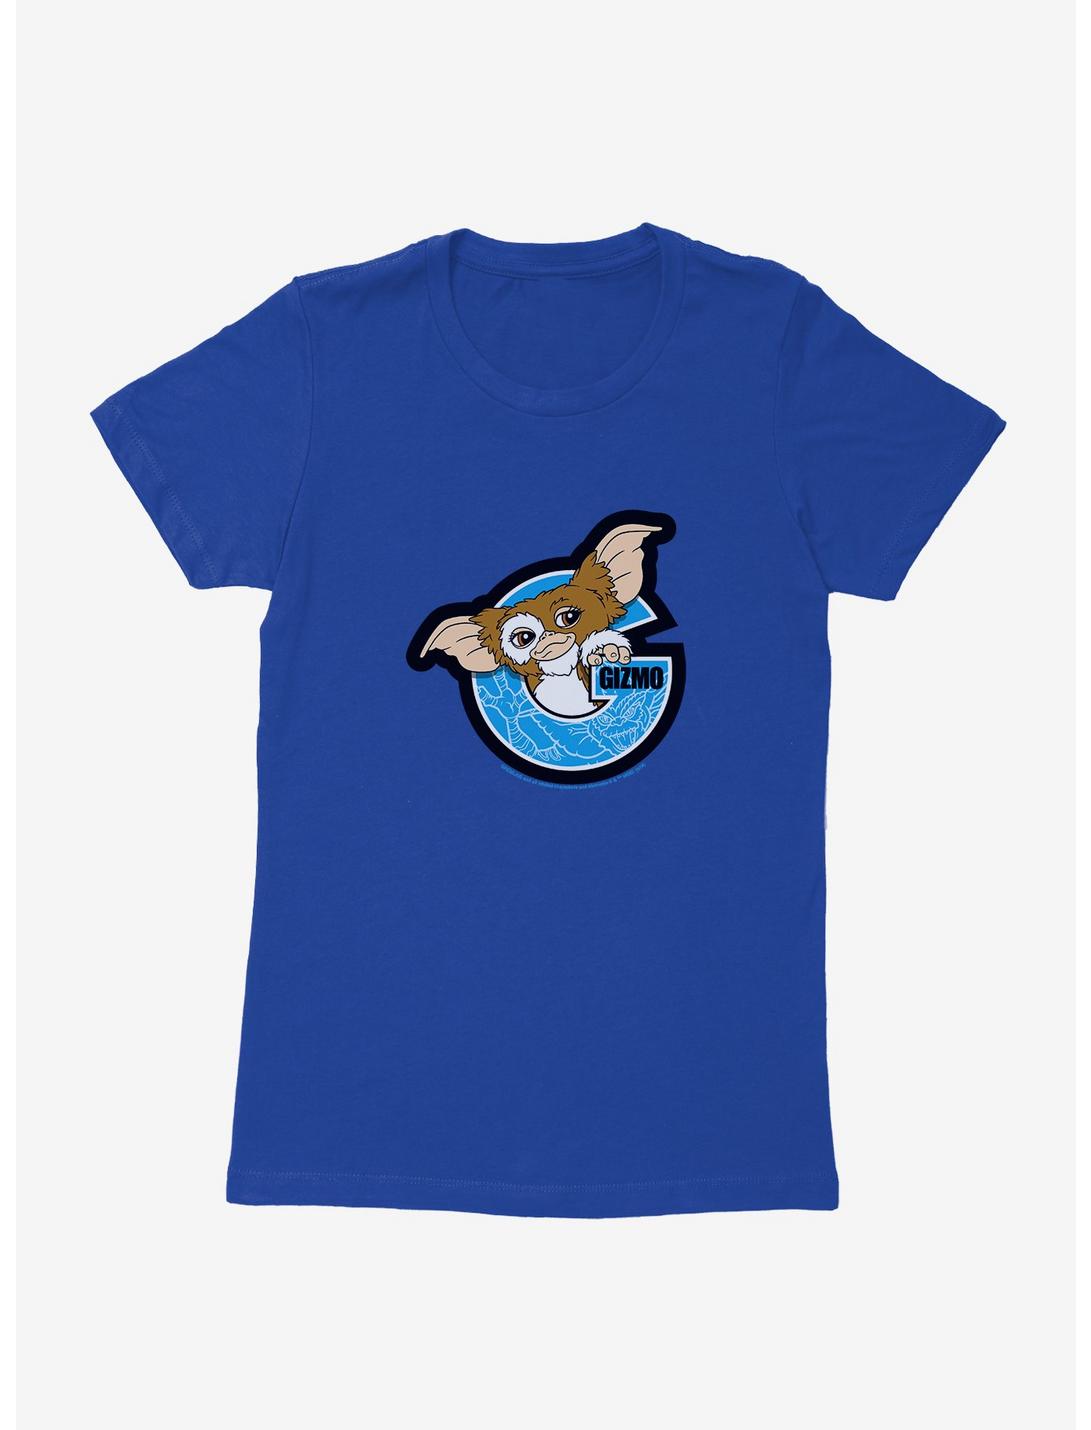 Gremlins G Is For Gizmo Womens T-Shirt, ROYAL, hi-res